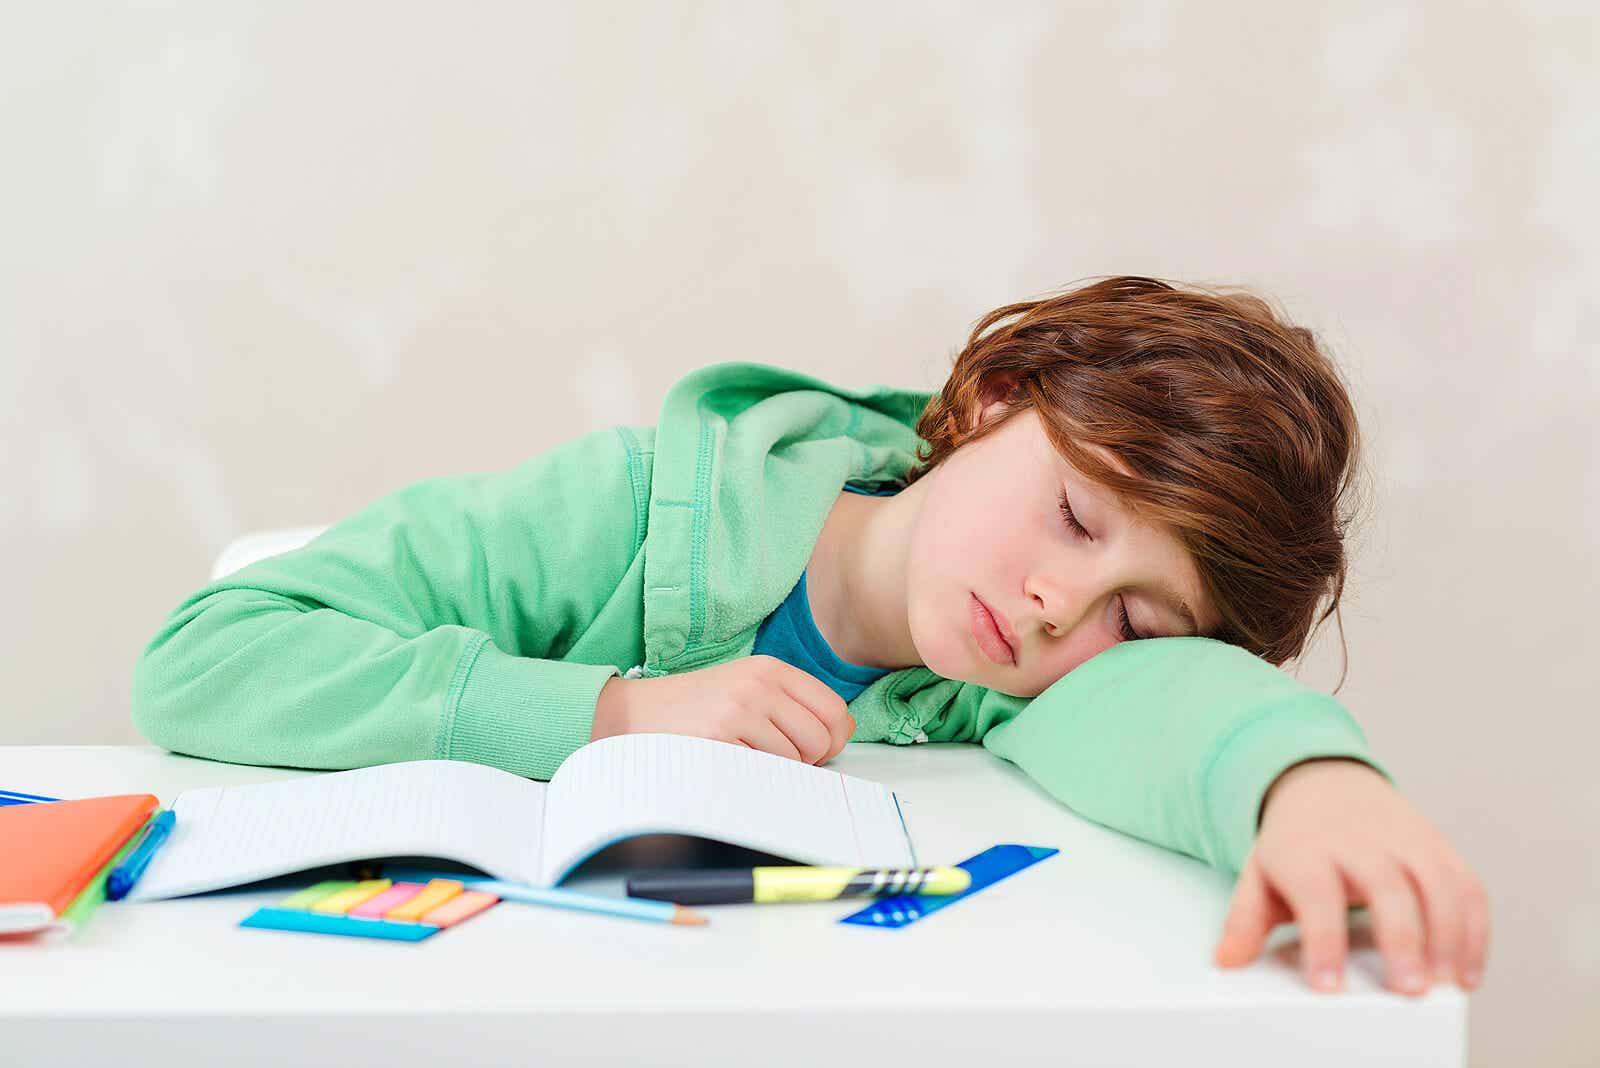 A child who's fallen asleep while studying.